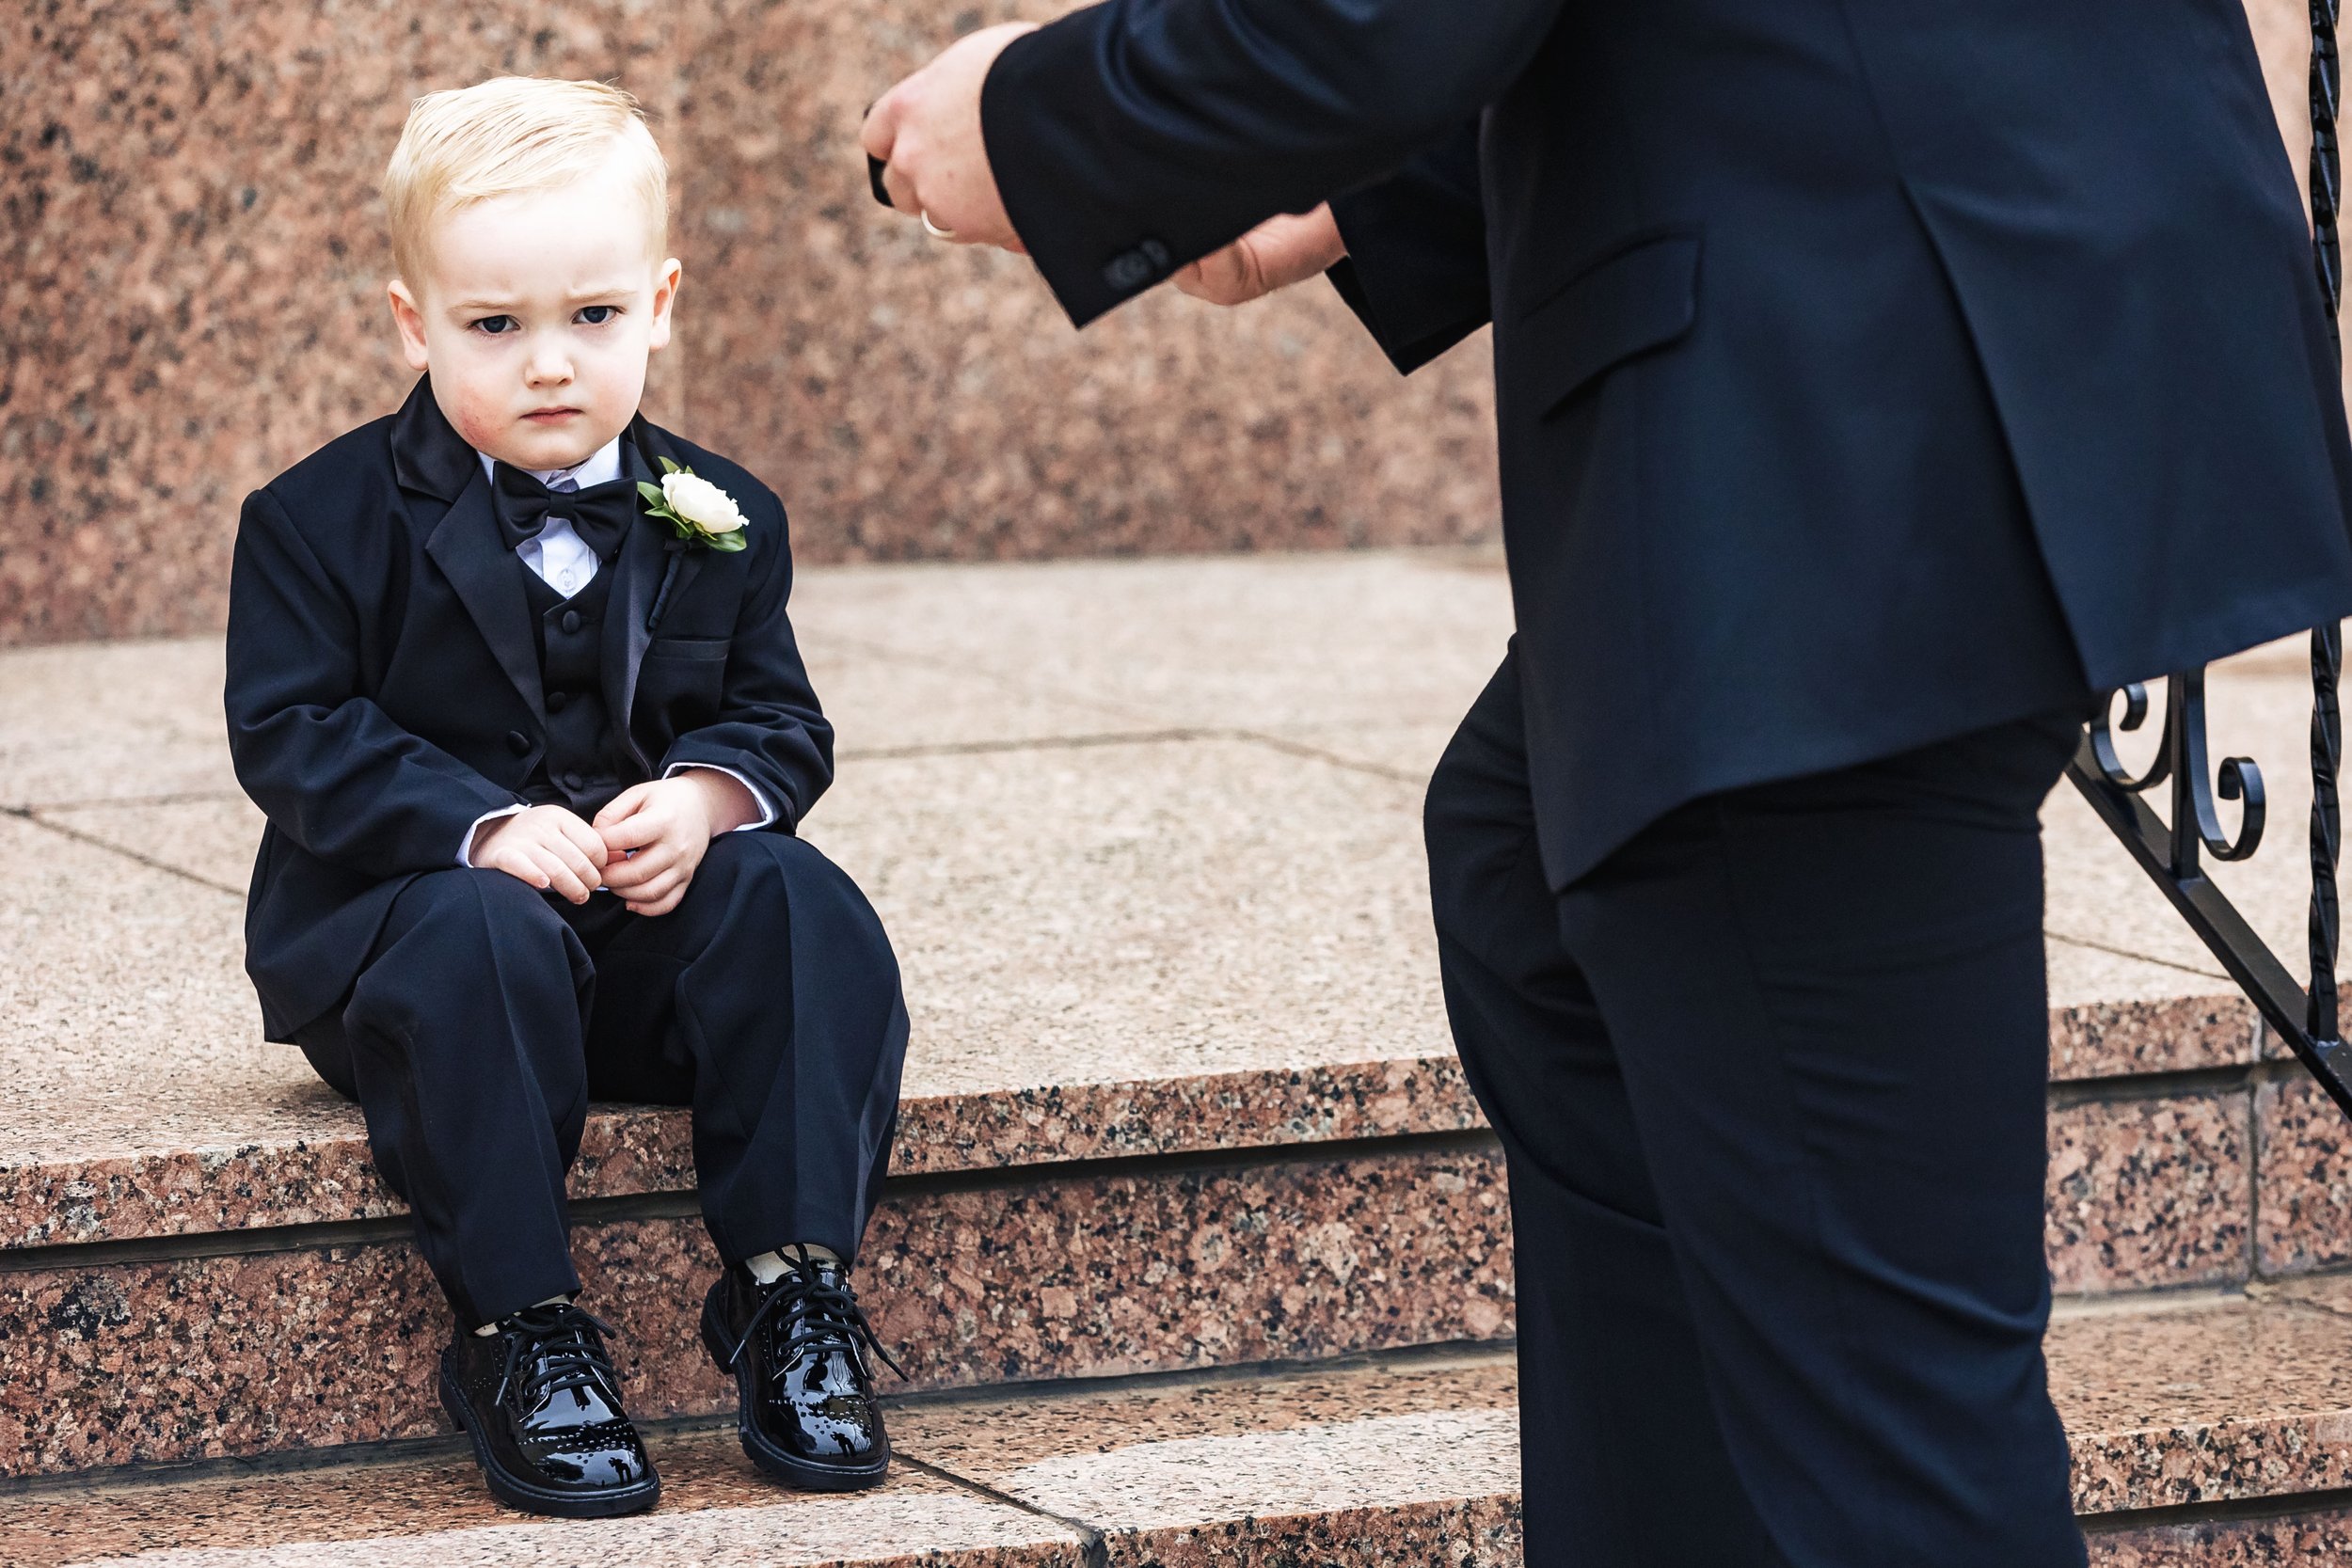  He loved being a ring bearer! 